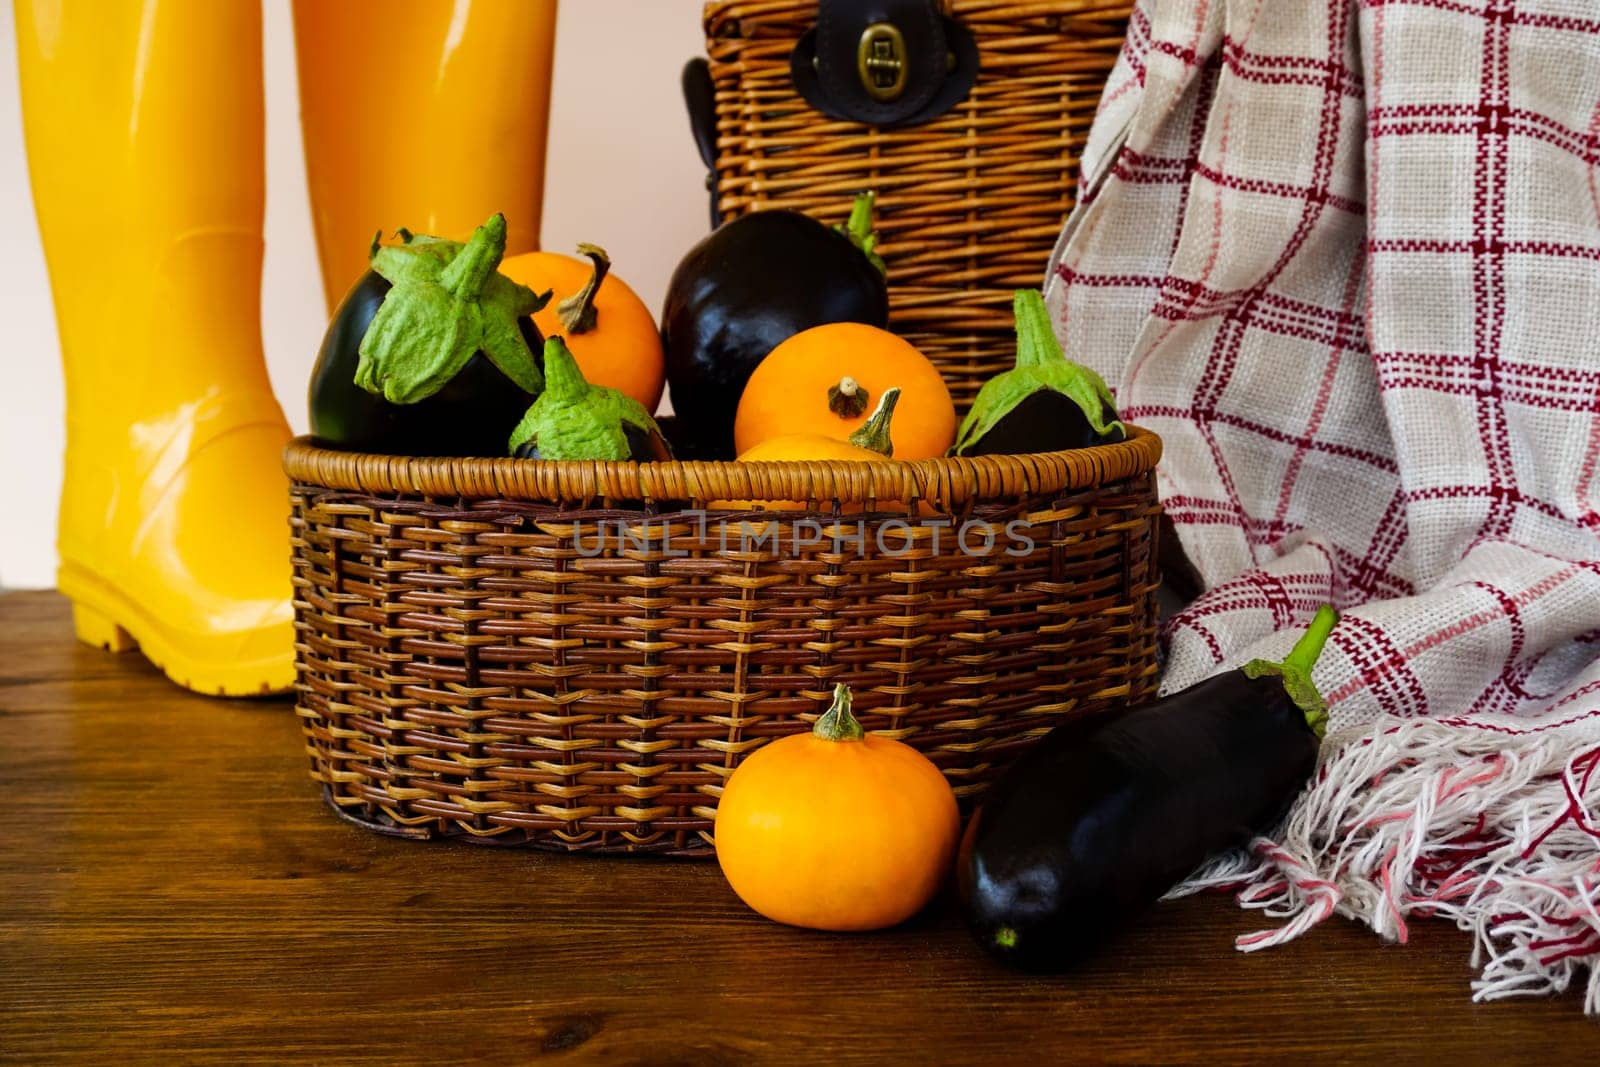 A basket with eggplants and pumpkins is on the table, and in the background there is a wicker basket and yellow rubber boots by Spirina